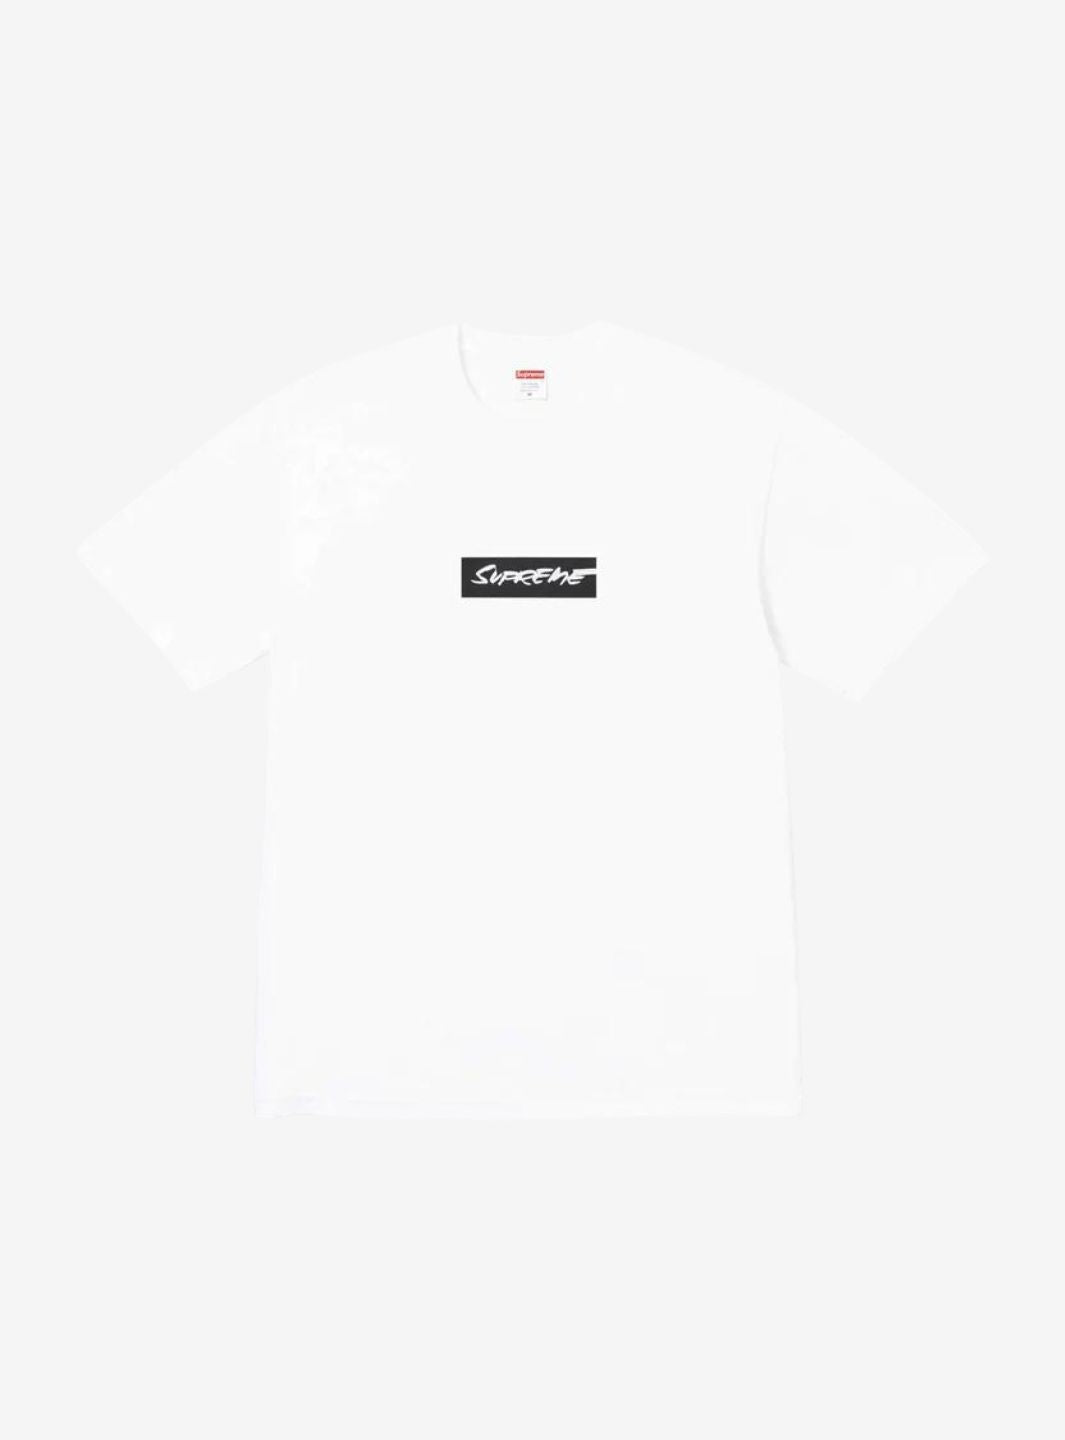 Supreme | Discover the Supreme Brand from ResellZone